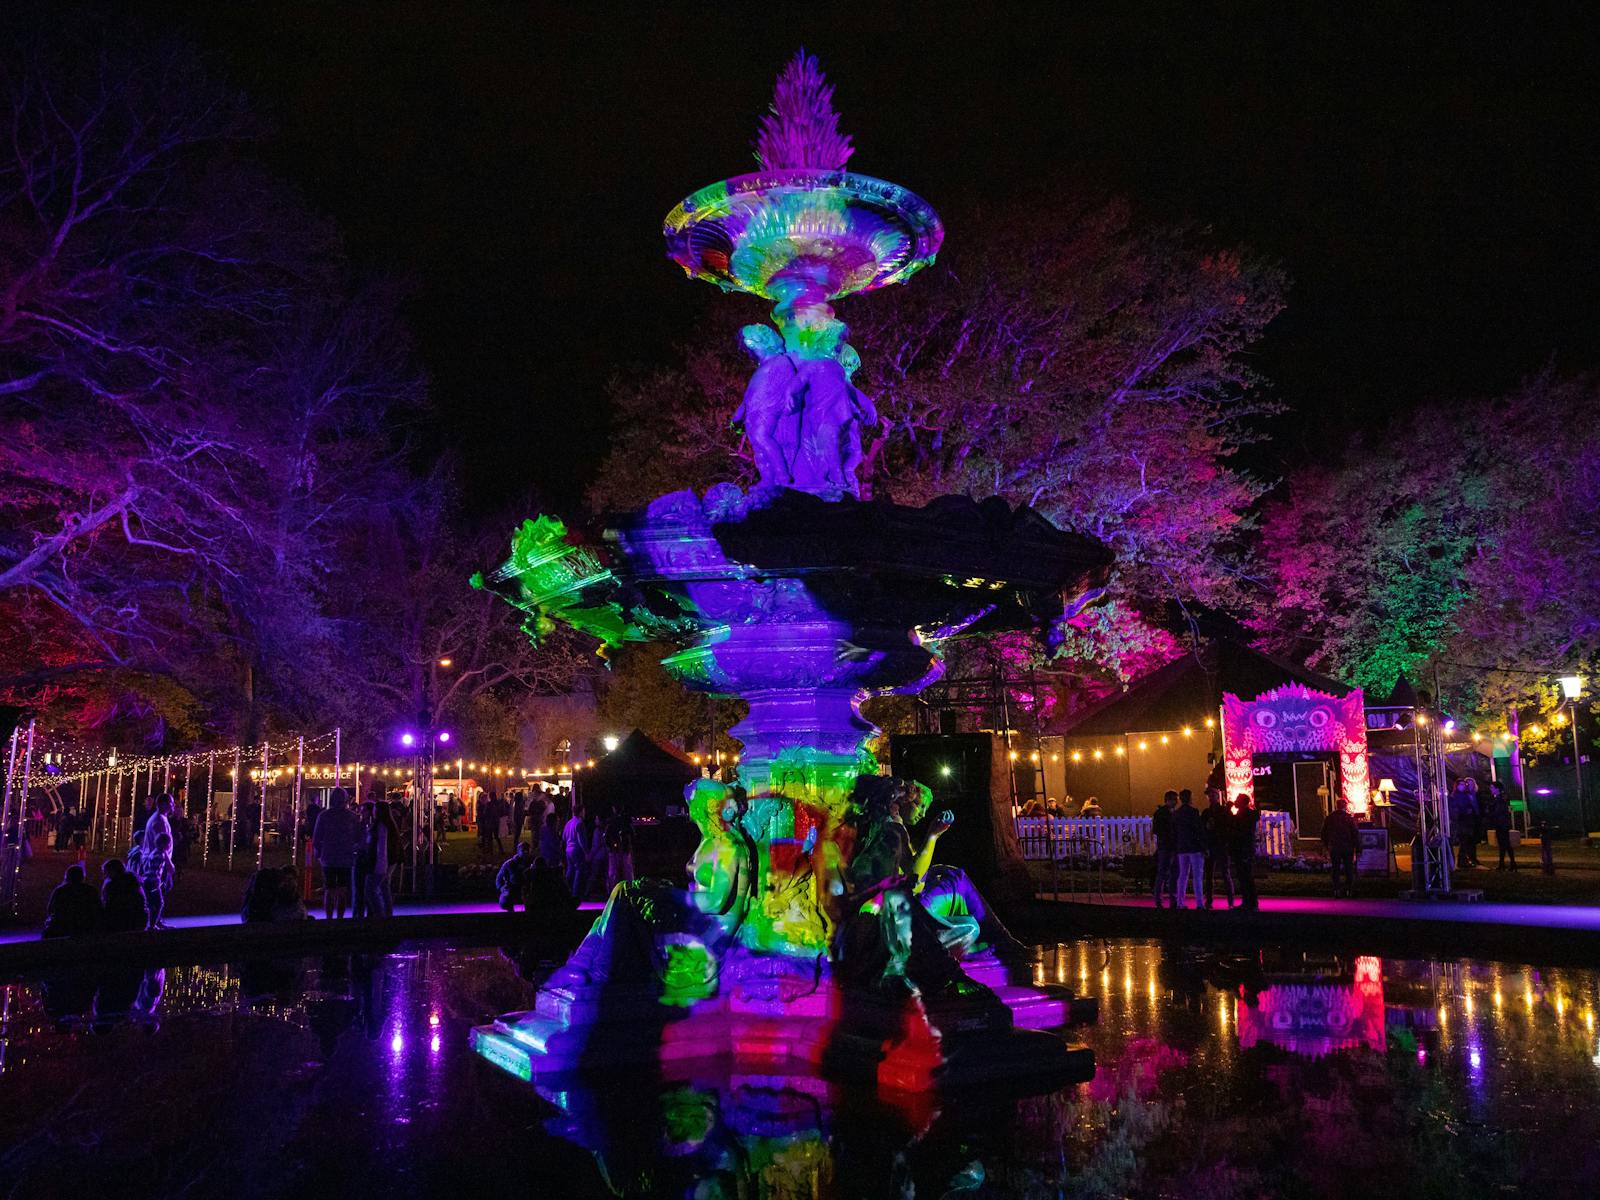 Darkly lit fountain with colourful projection art